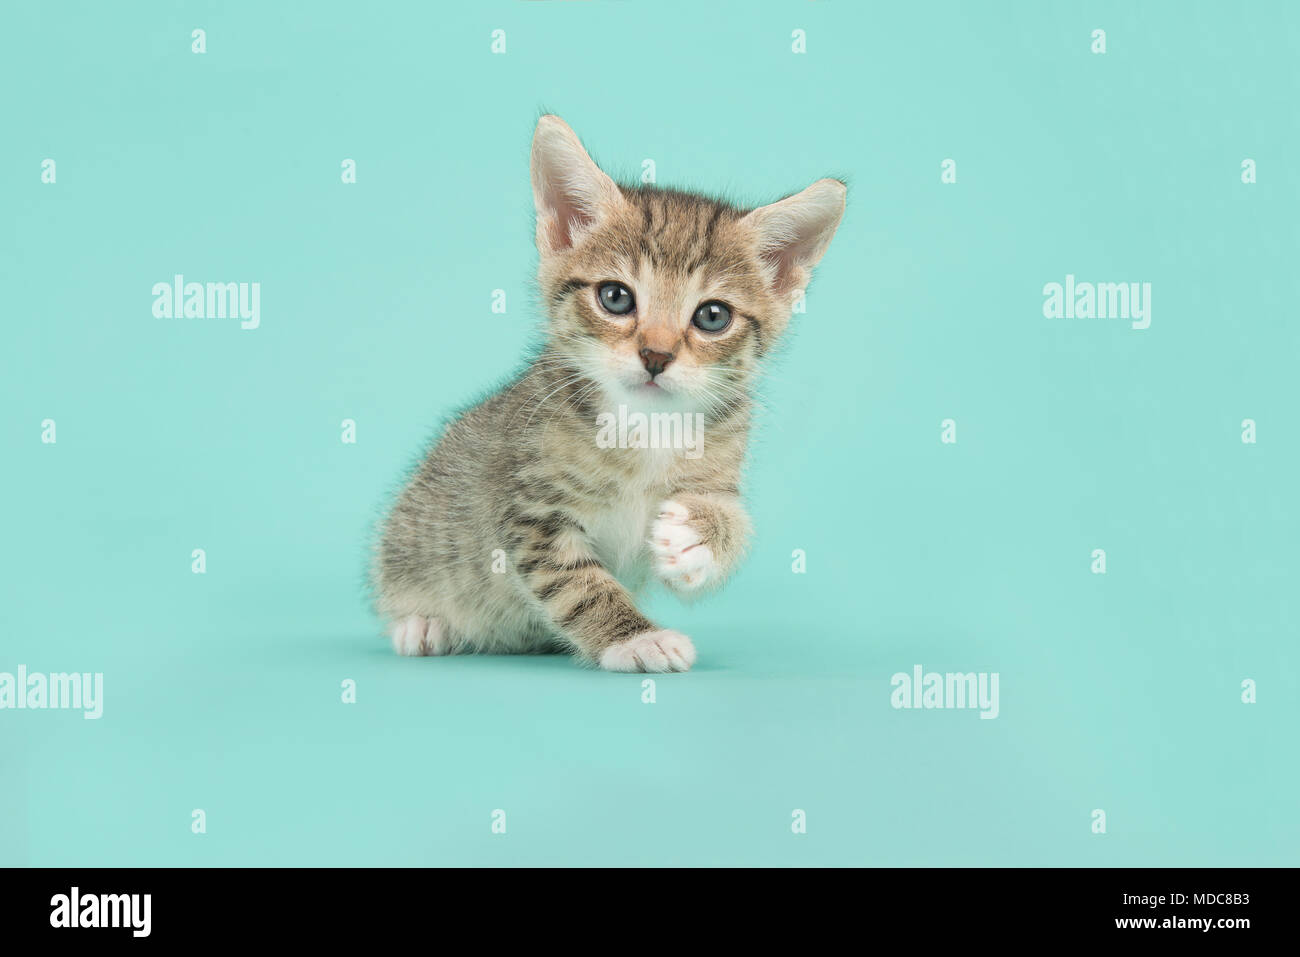 Cute tabby kitten cat looking at the camera sitting on a turquoise blue background Stock Photo